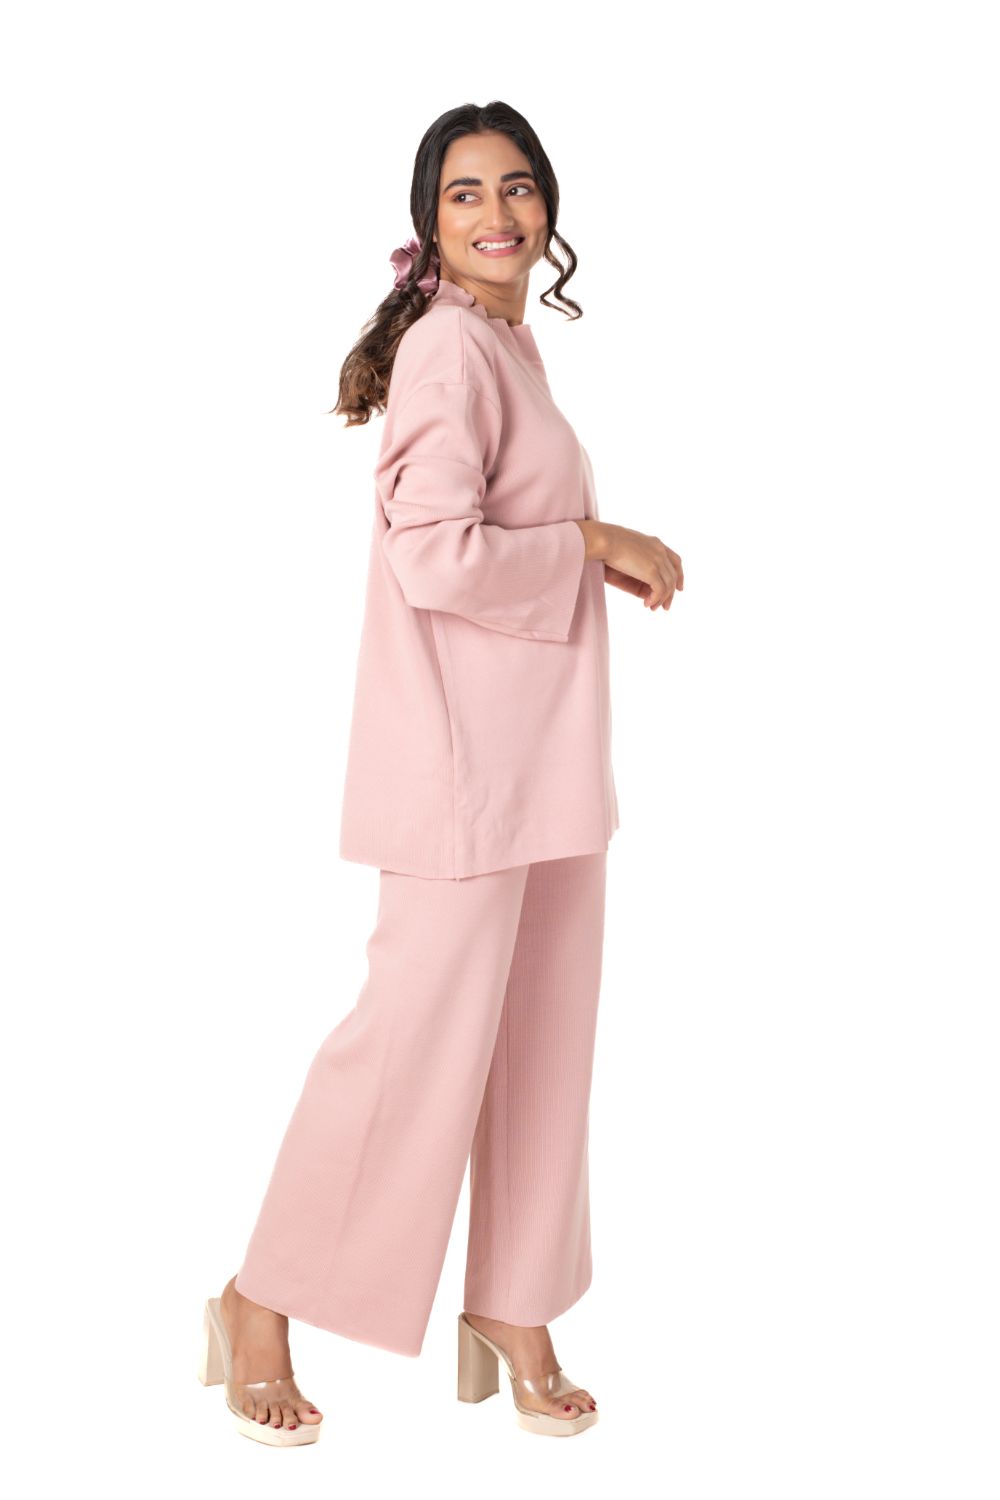 Cosy Airport Ready Coord Set full sleeve light pink lounge wear featured